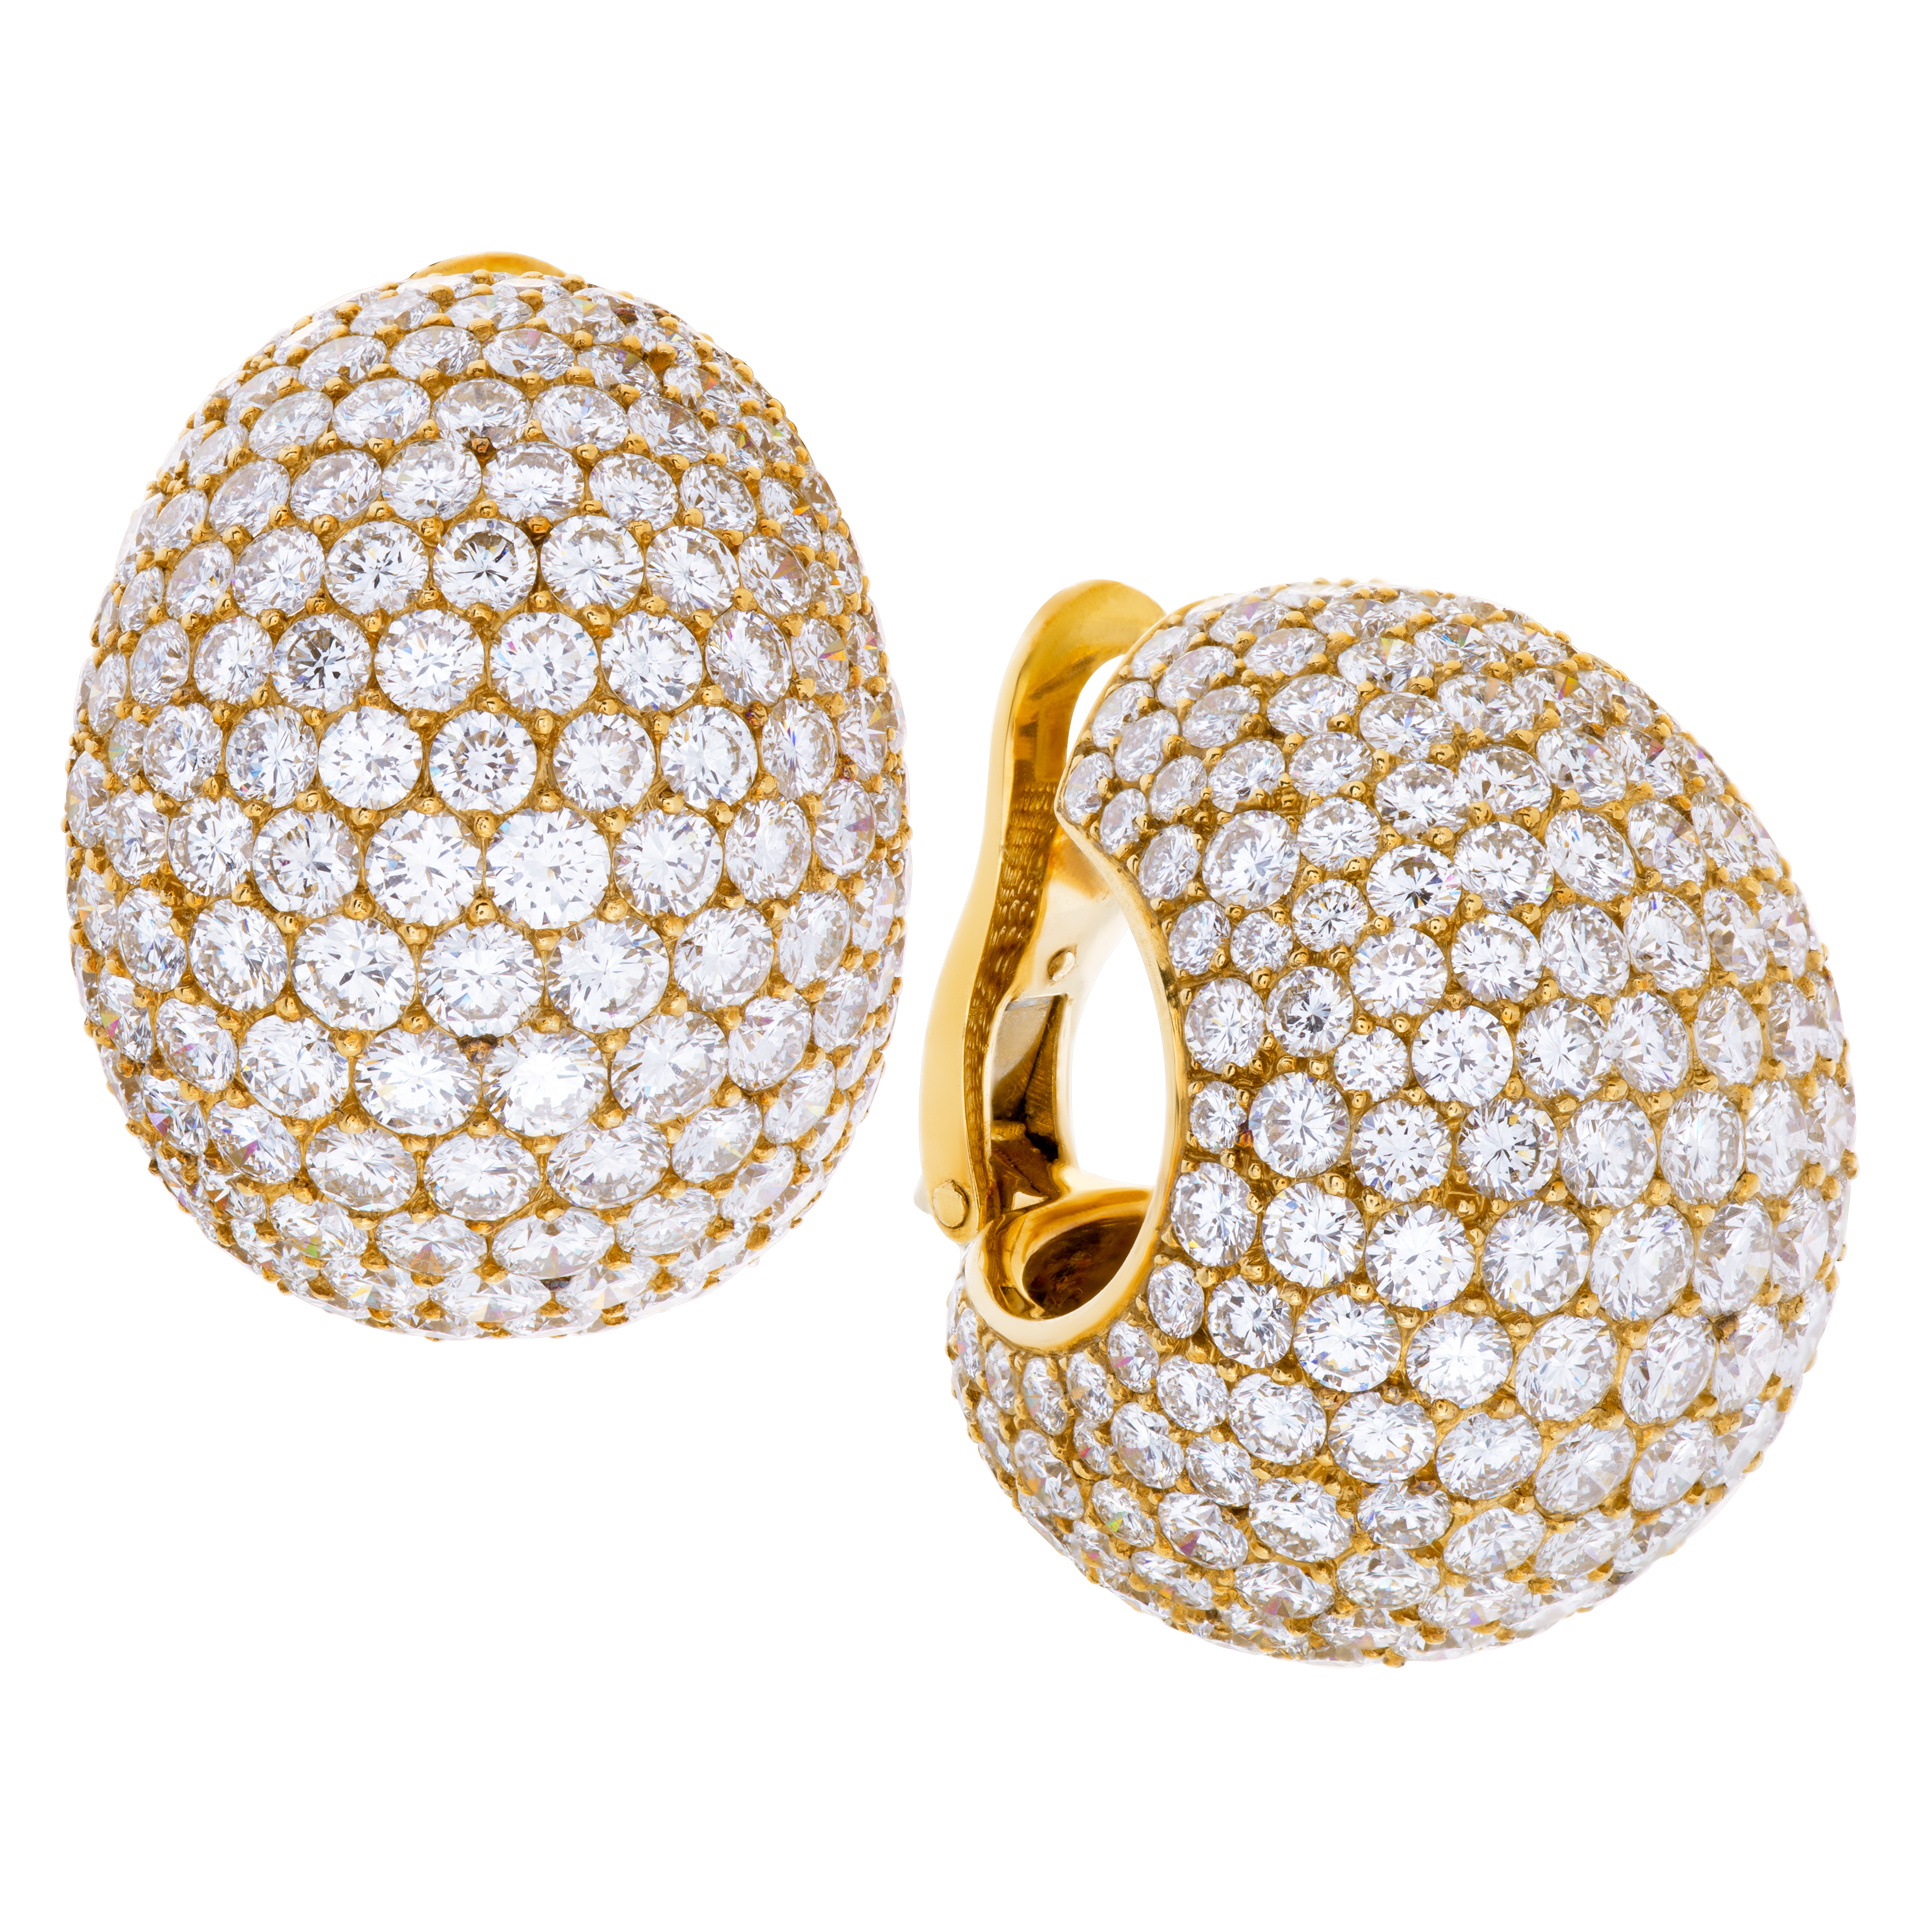 Vintage (circa 1970) Cartier "Bombee" earrings with over 25 carats full cut round brilliant diamonds, set in 18K yellow gold